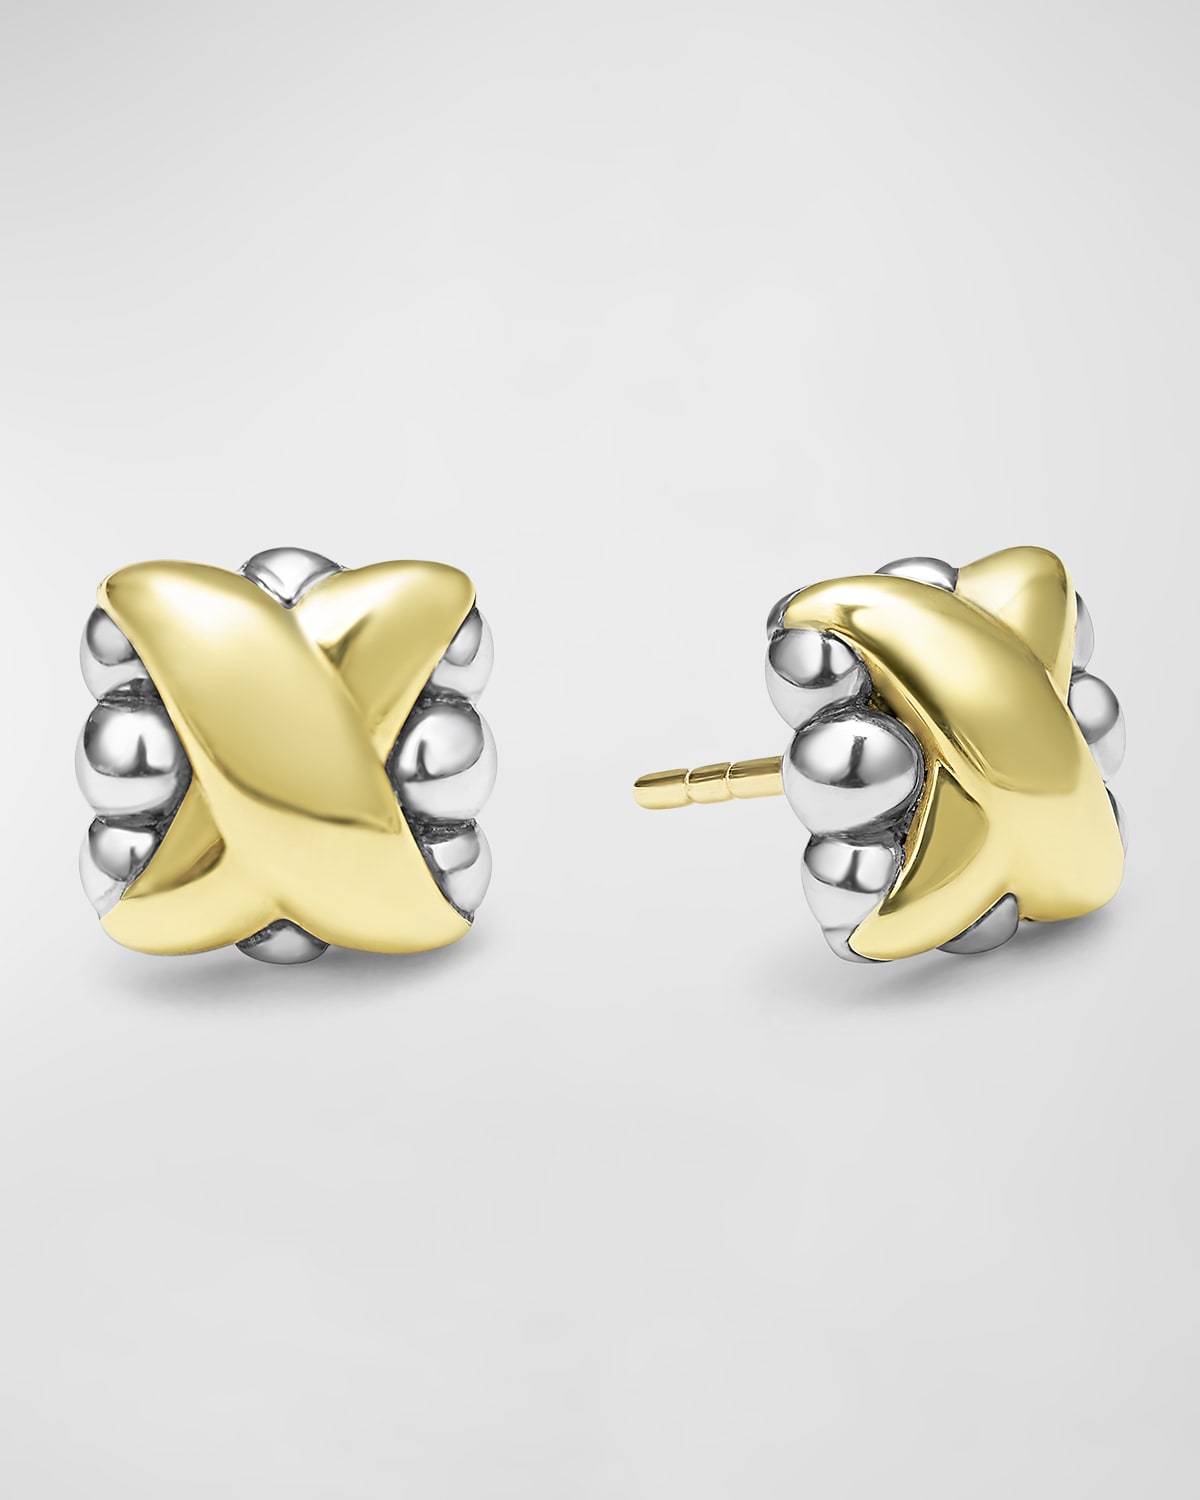 Embrace Sterling Silver and 18K Gold X Stud Earrings, 8mm